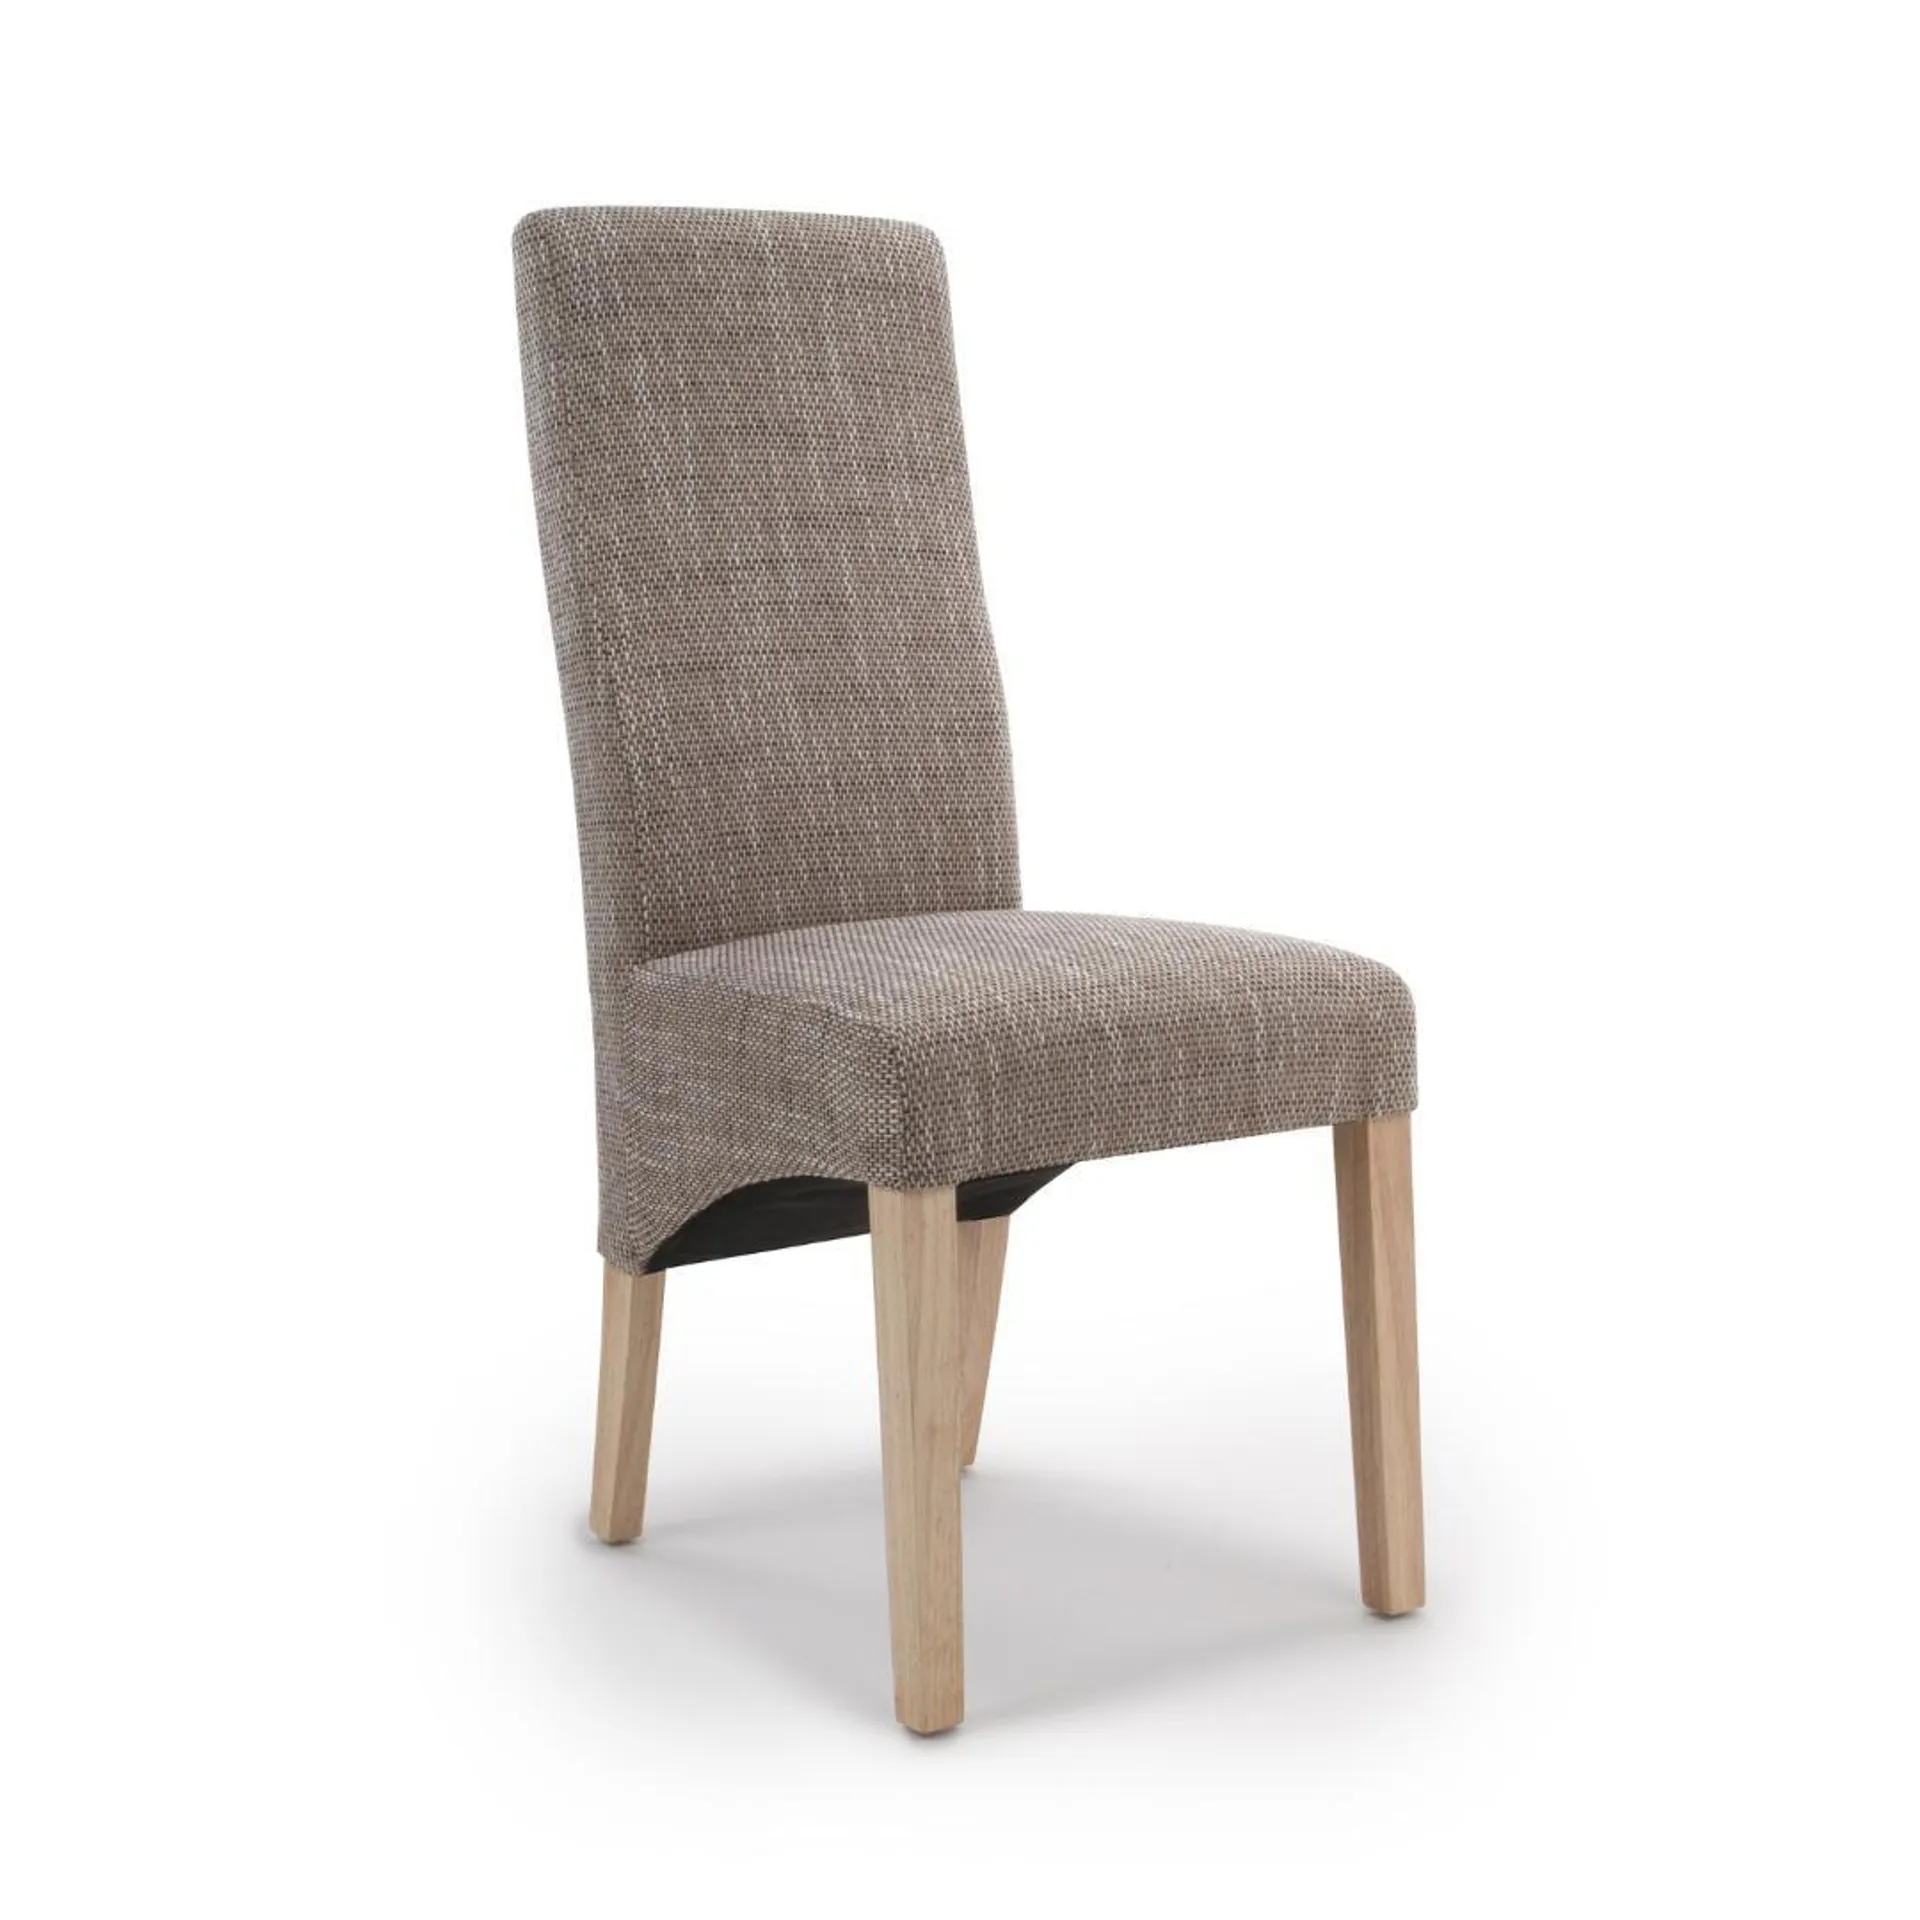 Baxter Wave Back Tweed Oatmeal Dining Chair Set Of 2